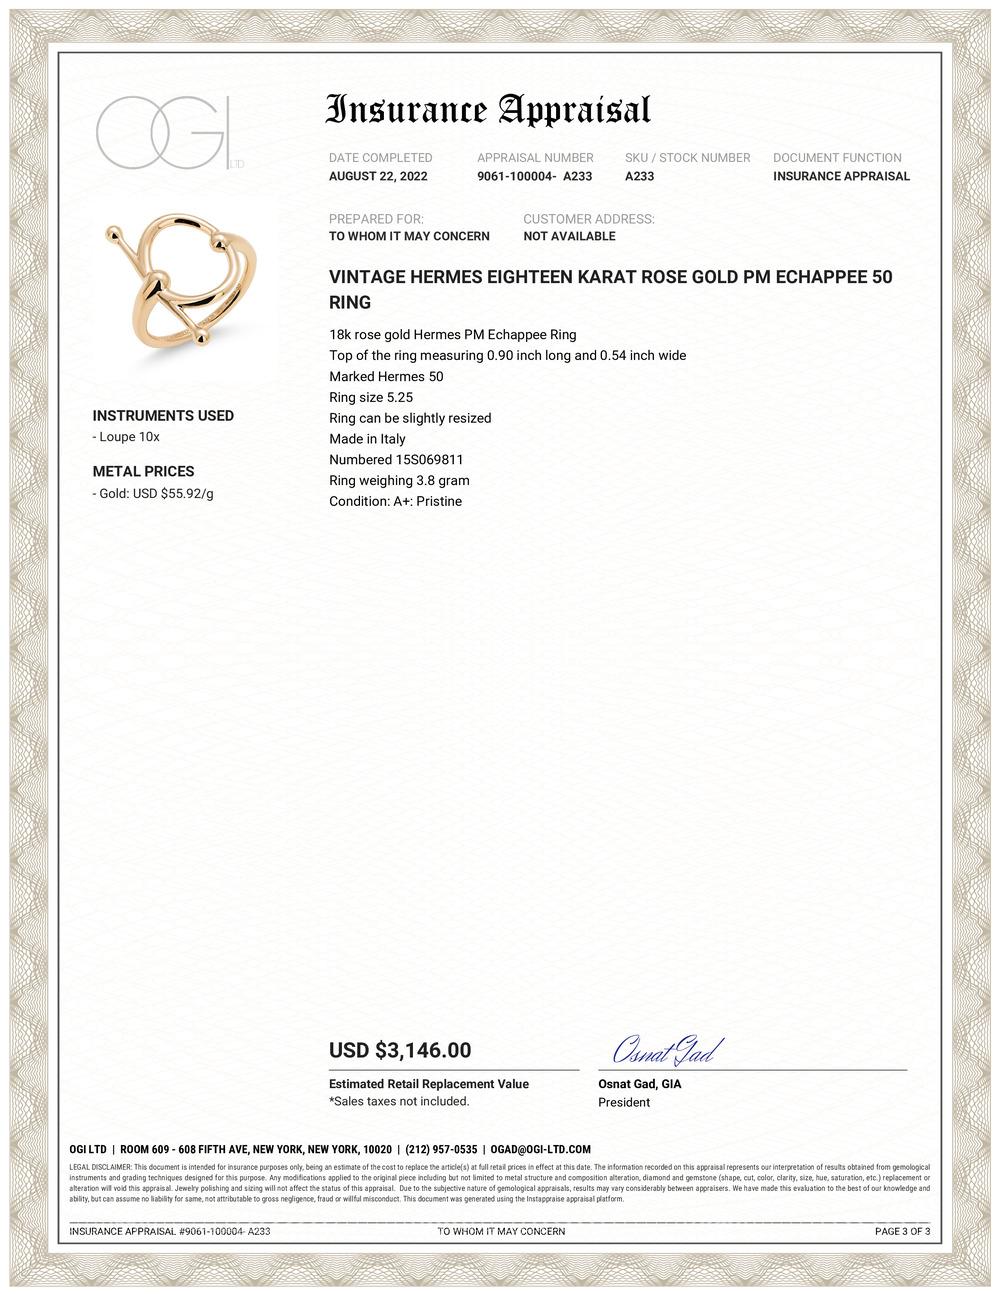 18k rose gold  Hermes PM Echappee Ring
Top of the ring measuring 0.90 inch long and 0.54 inch wide
Marked Hermes 50
Ring size 5.25
Ring can be slightly resized
Made in Italy
Numbered 15S069811
Ring weighing 3.8 gram
According to the magazine Watch